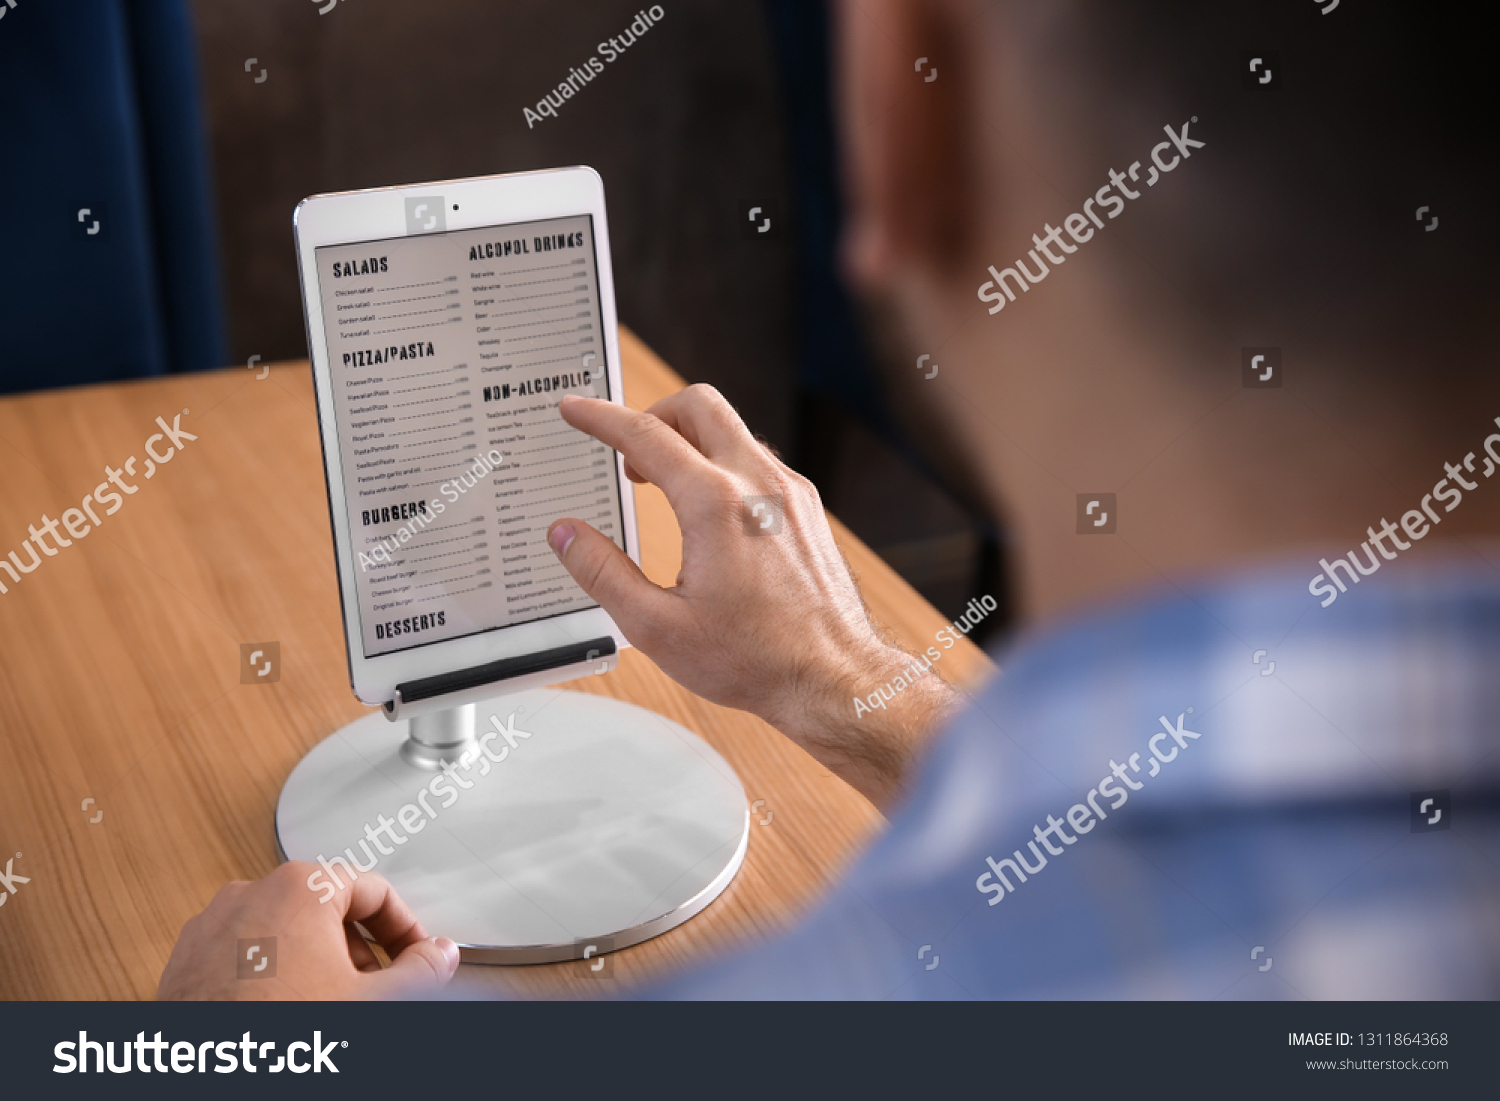 Young man with tablet PC looking through menu in restaurant #1311864368